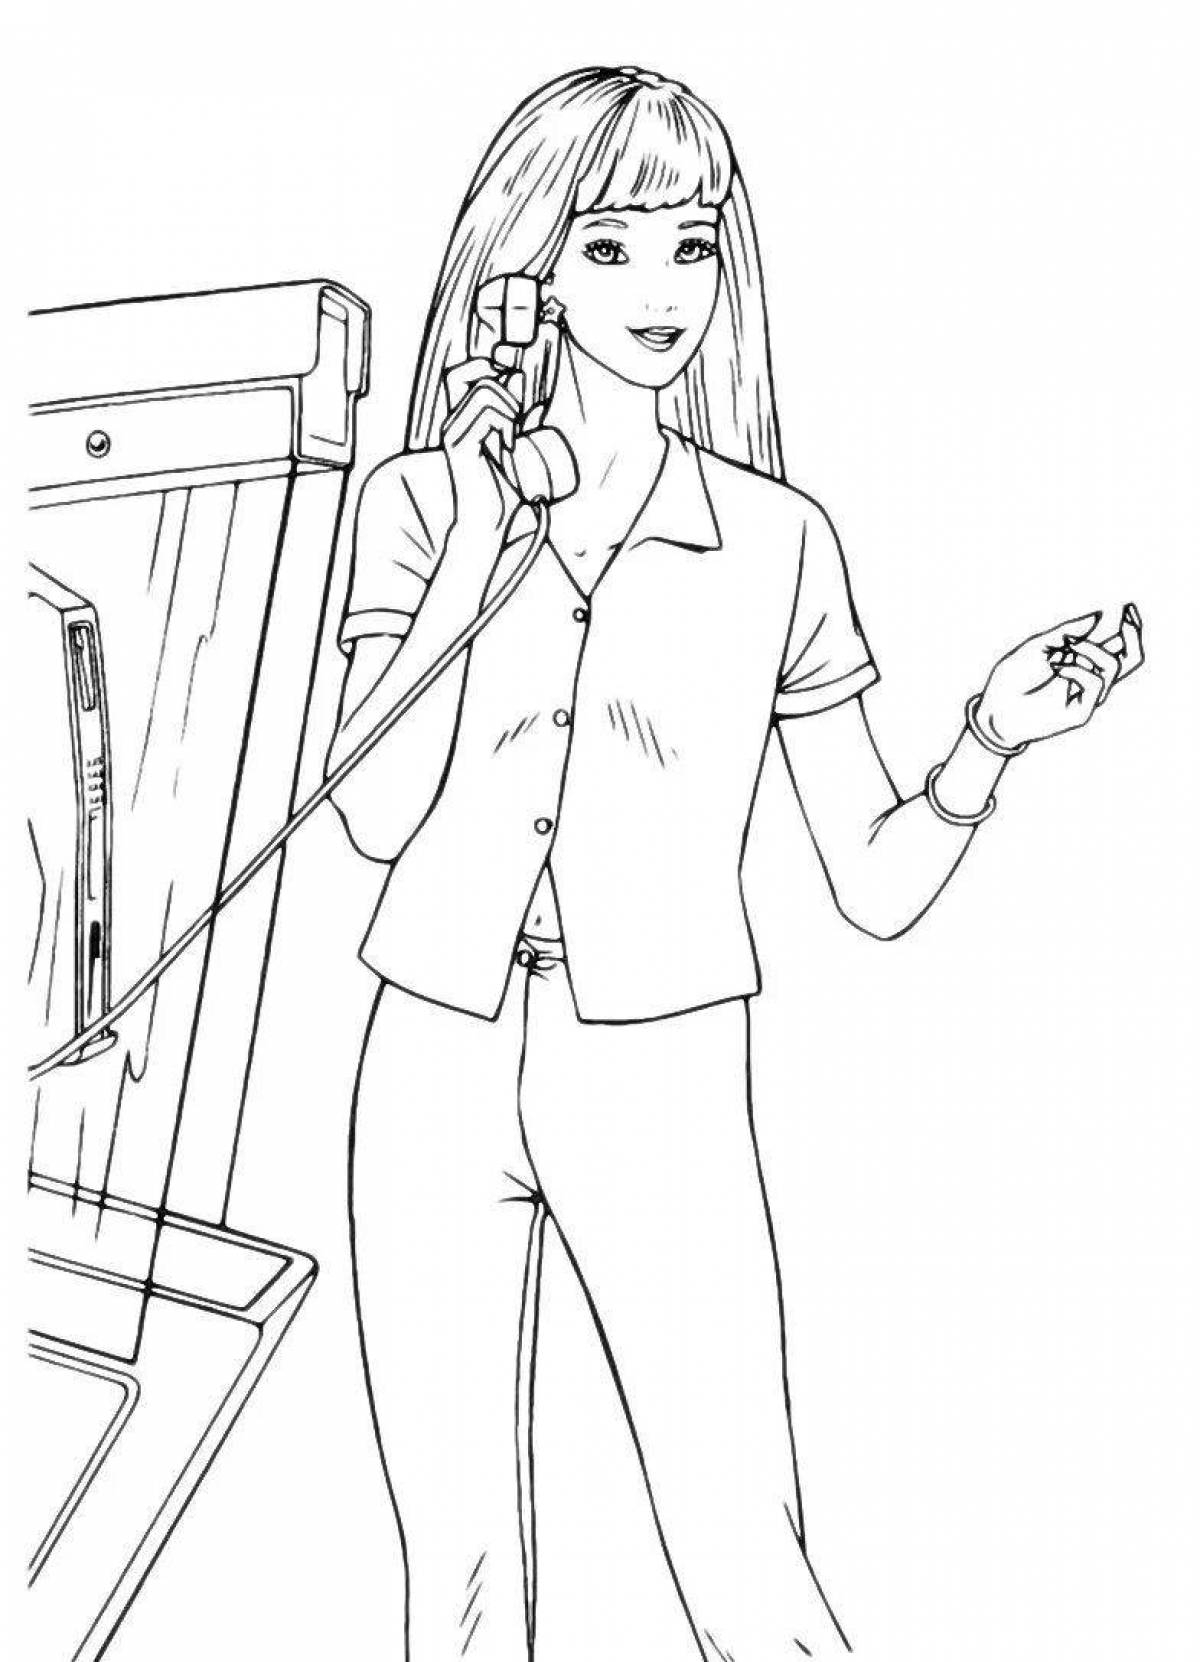 Charming barbie doctor coloring book